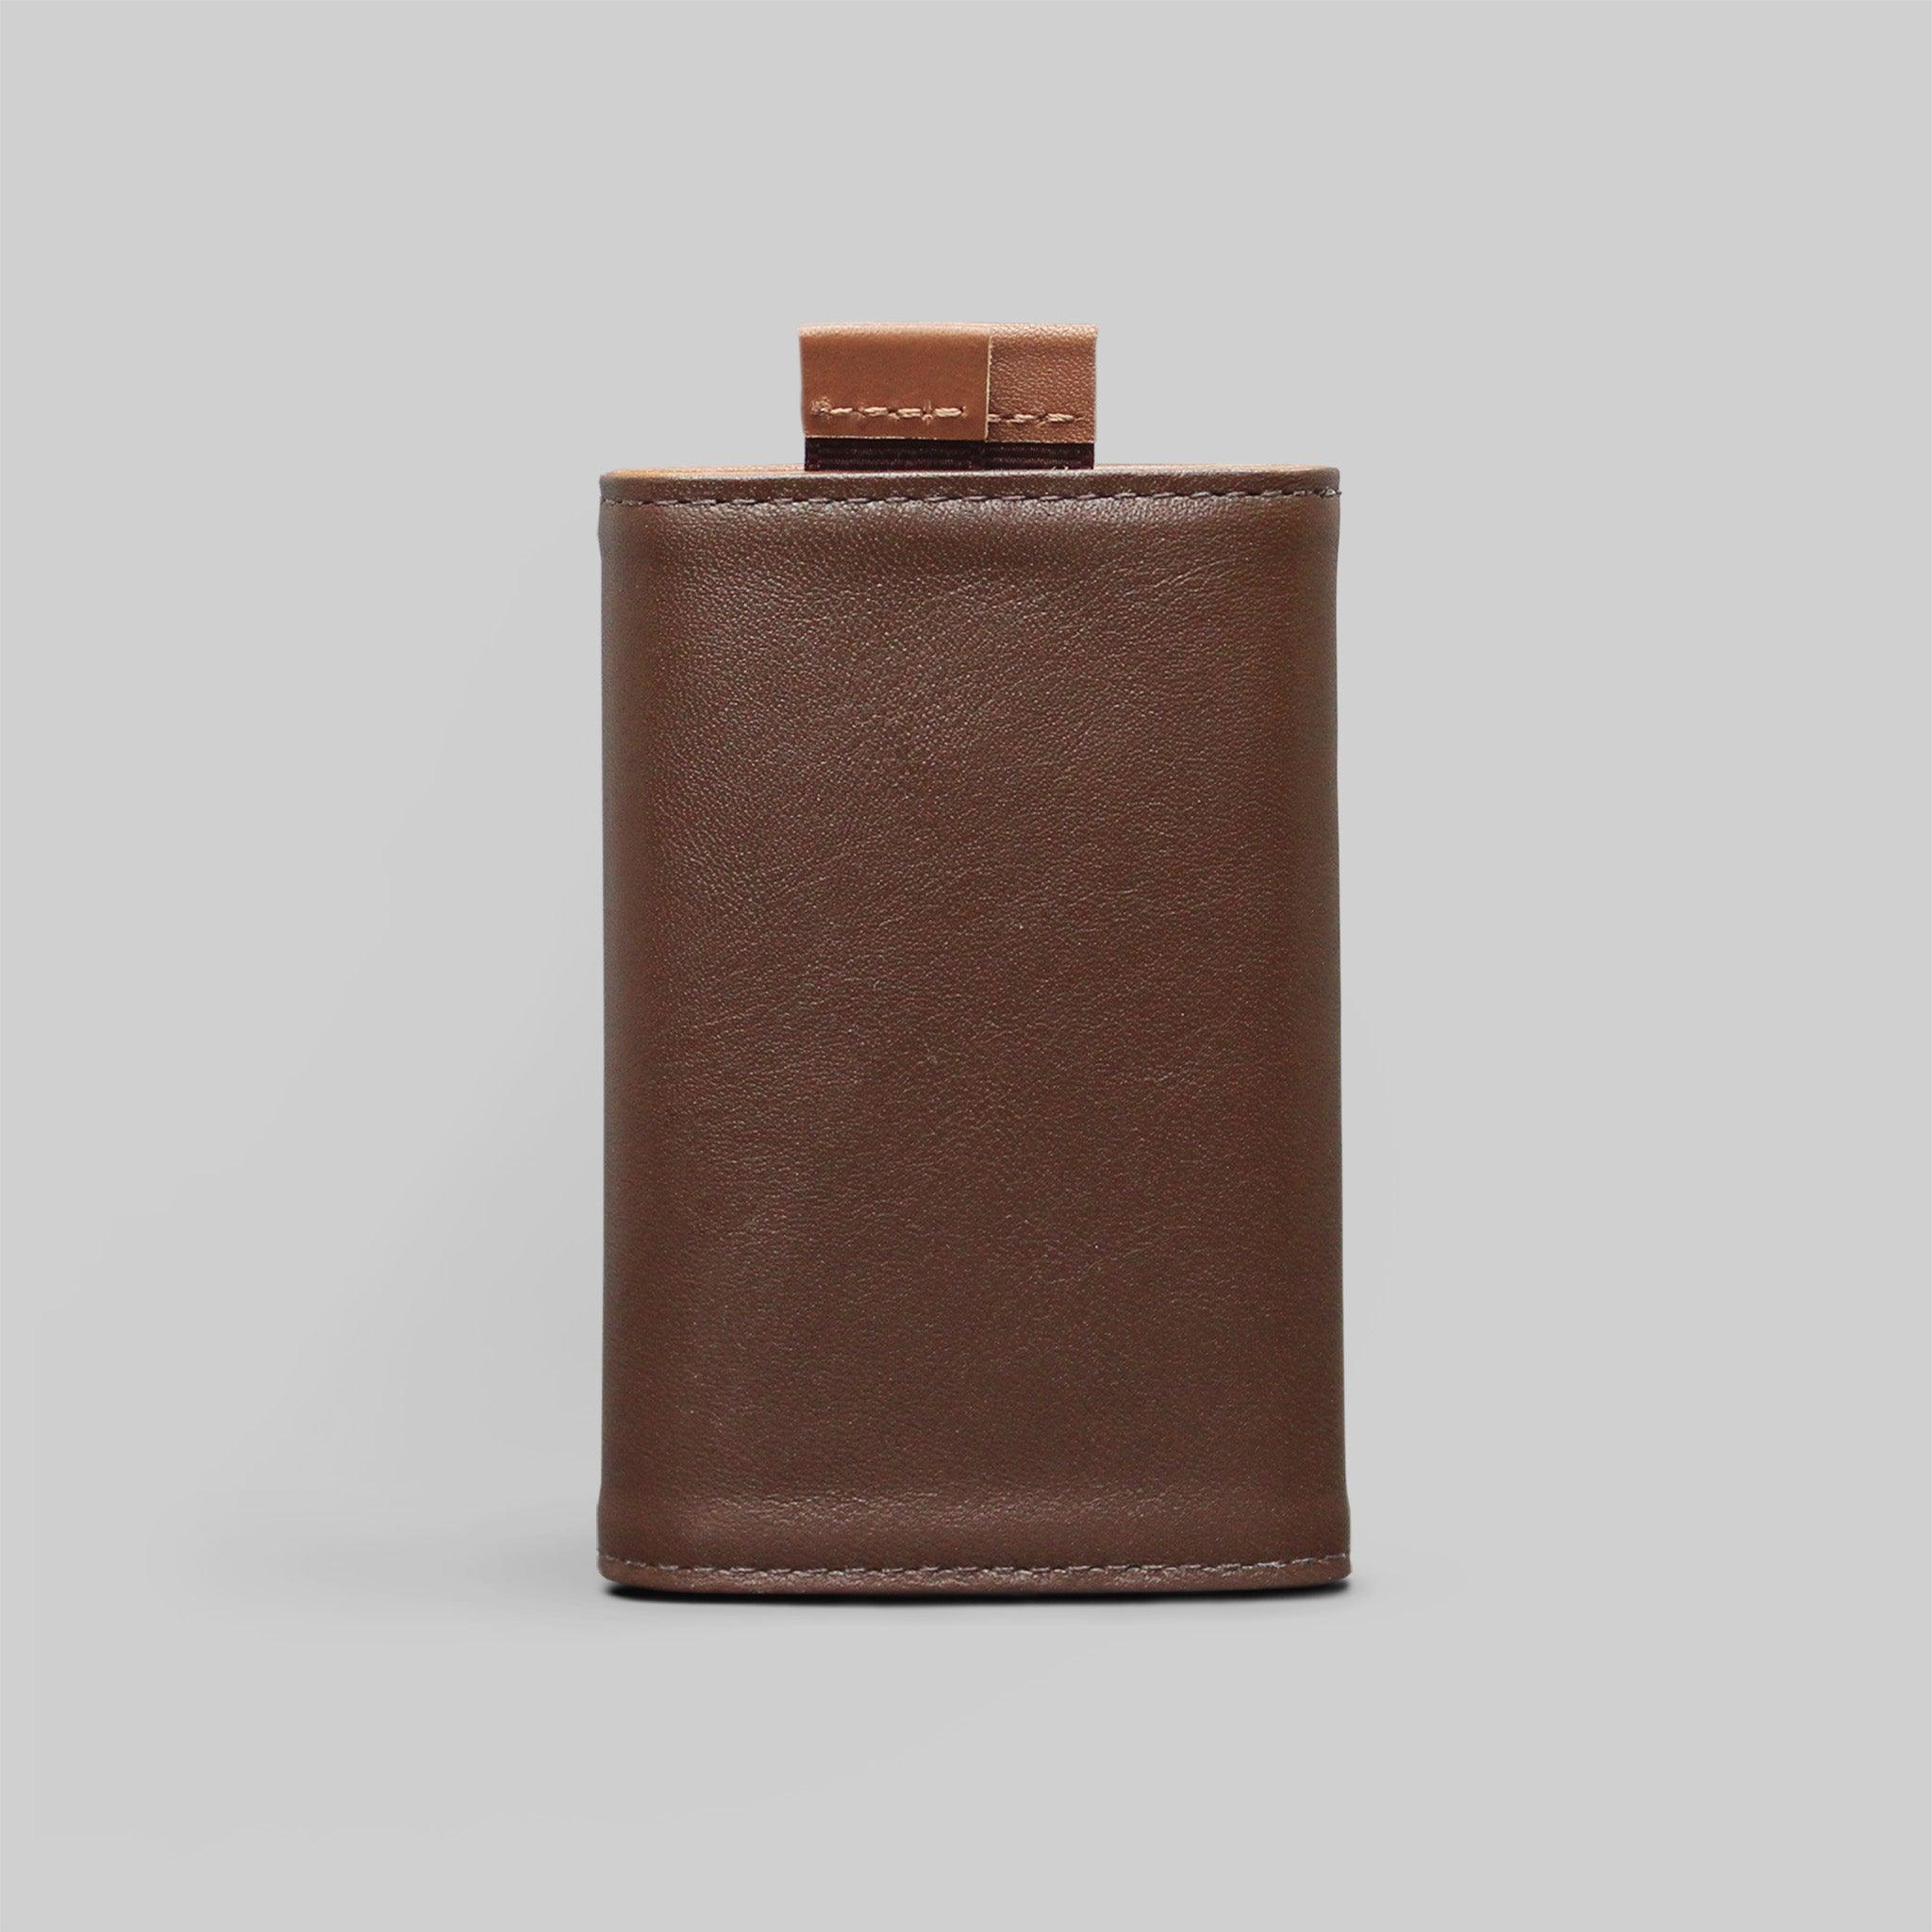 Premium Handcrafted Leather Wallets | Buffalo Jackson